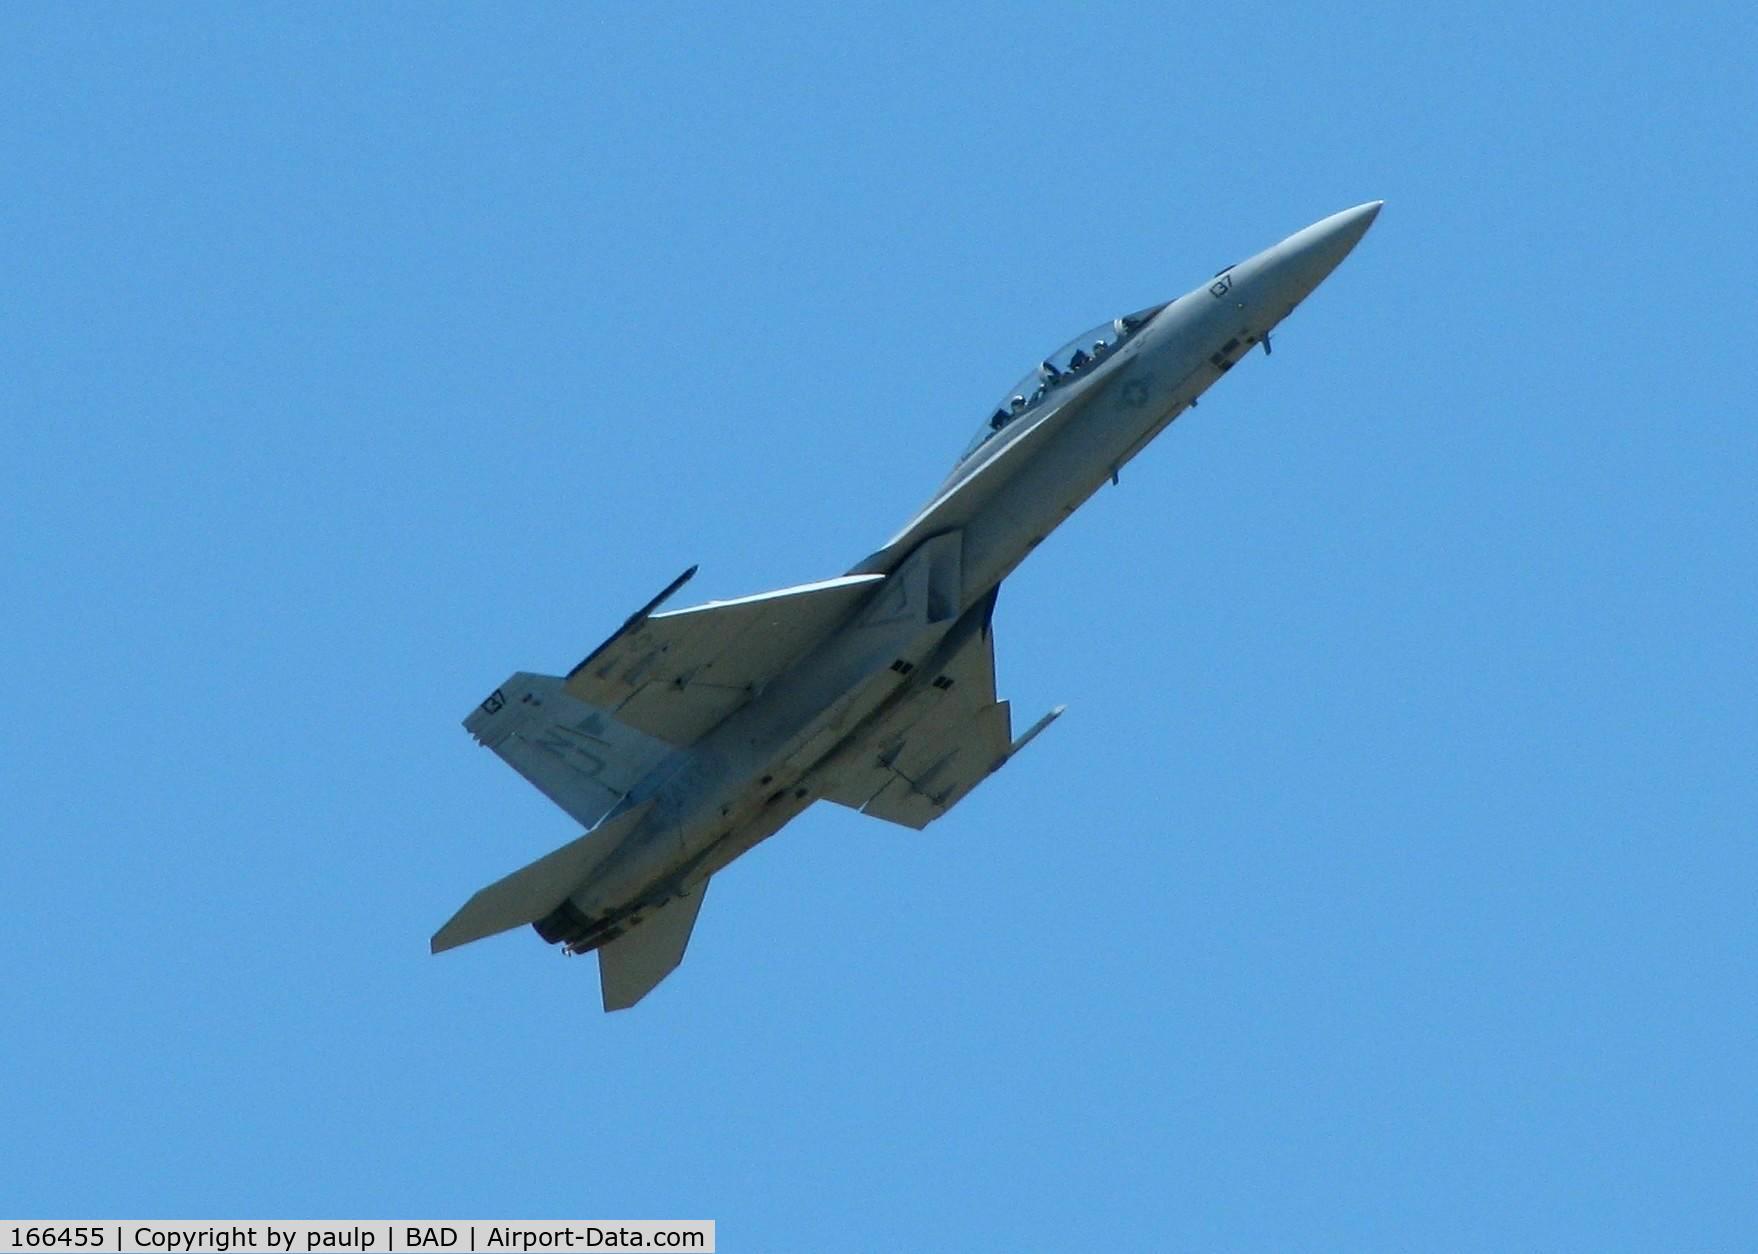 166455, Boeing F/A-18F Super Hornet C/N F090, Performing at the Barksdale AFB Air Show 2010.